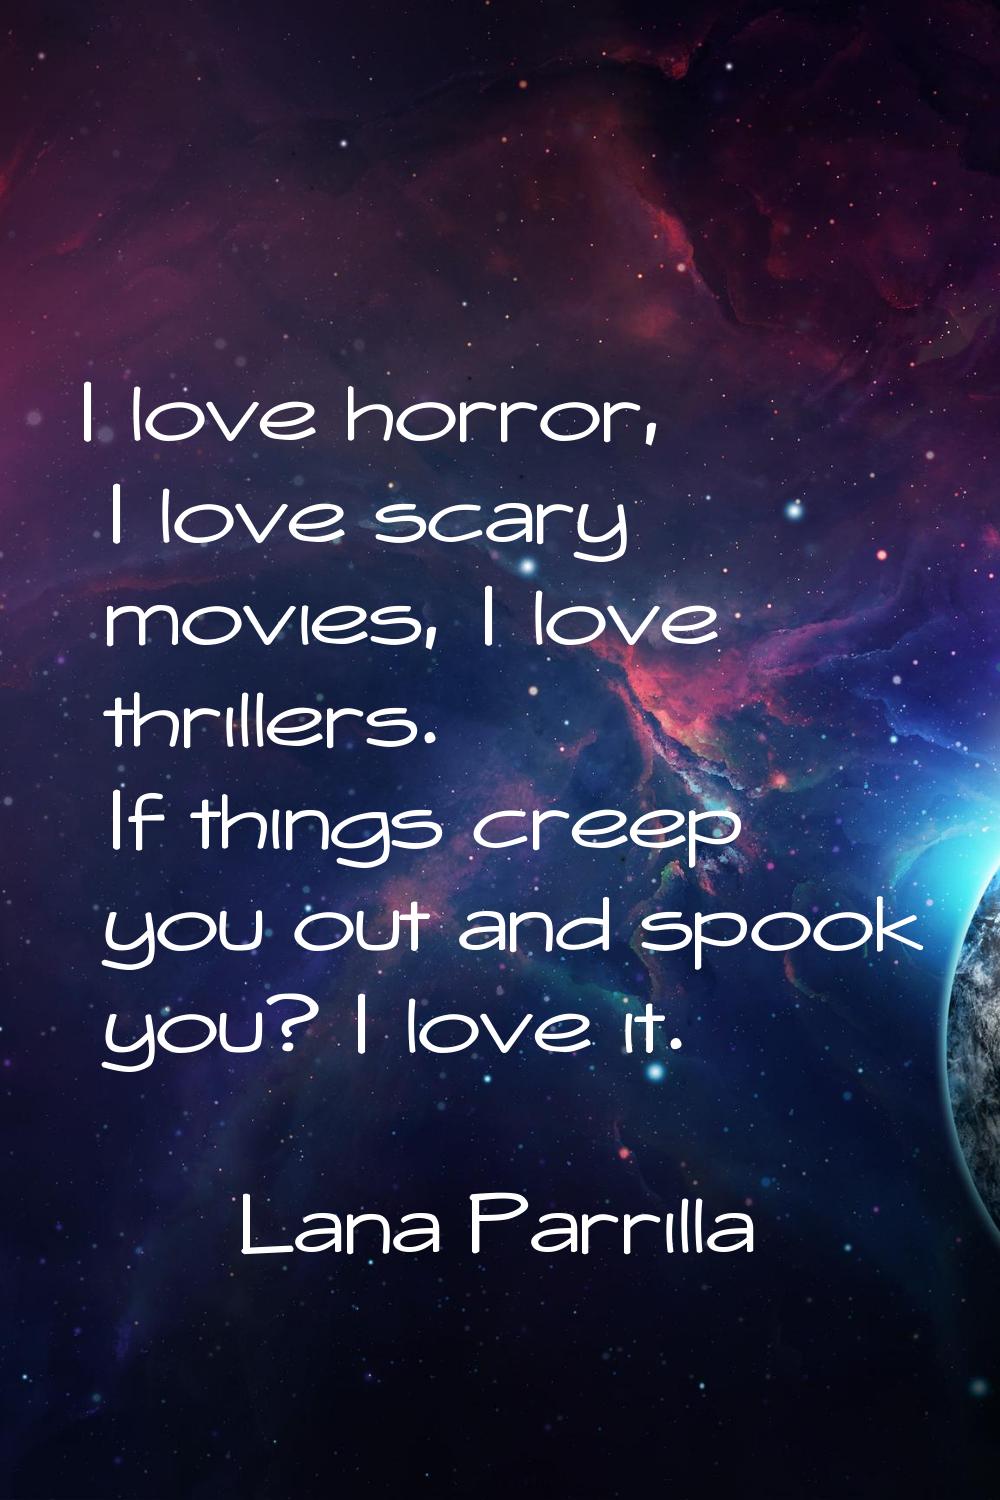 I love horror, I love scary movies, I love thrillers. If things creep you out and spook you? I love